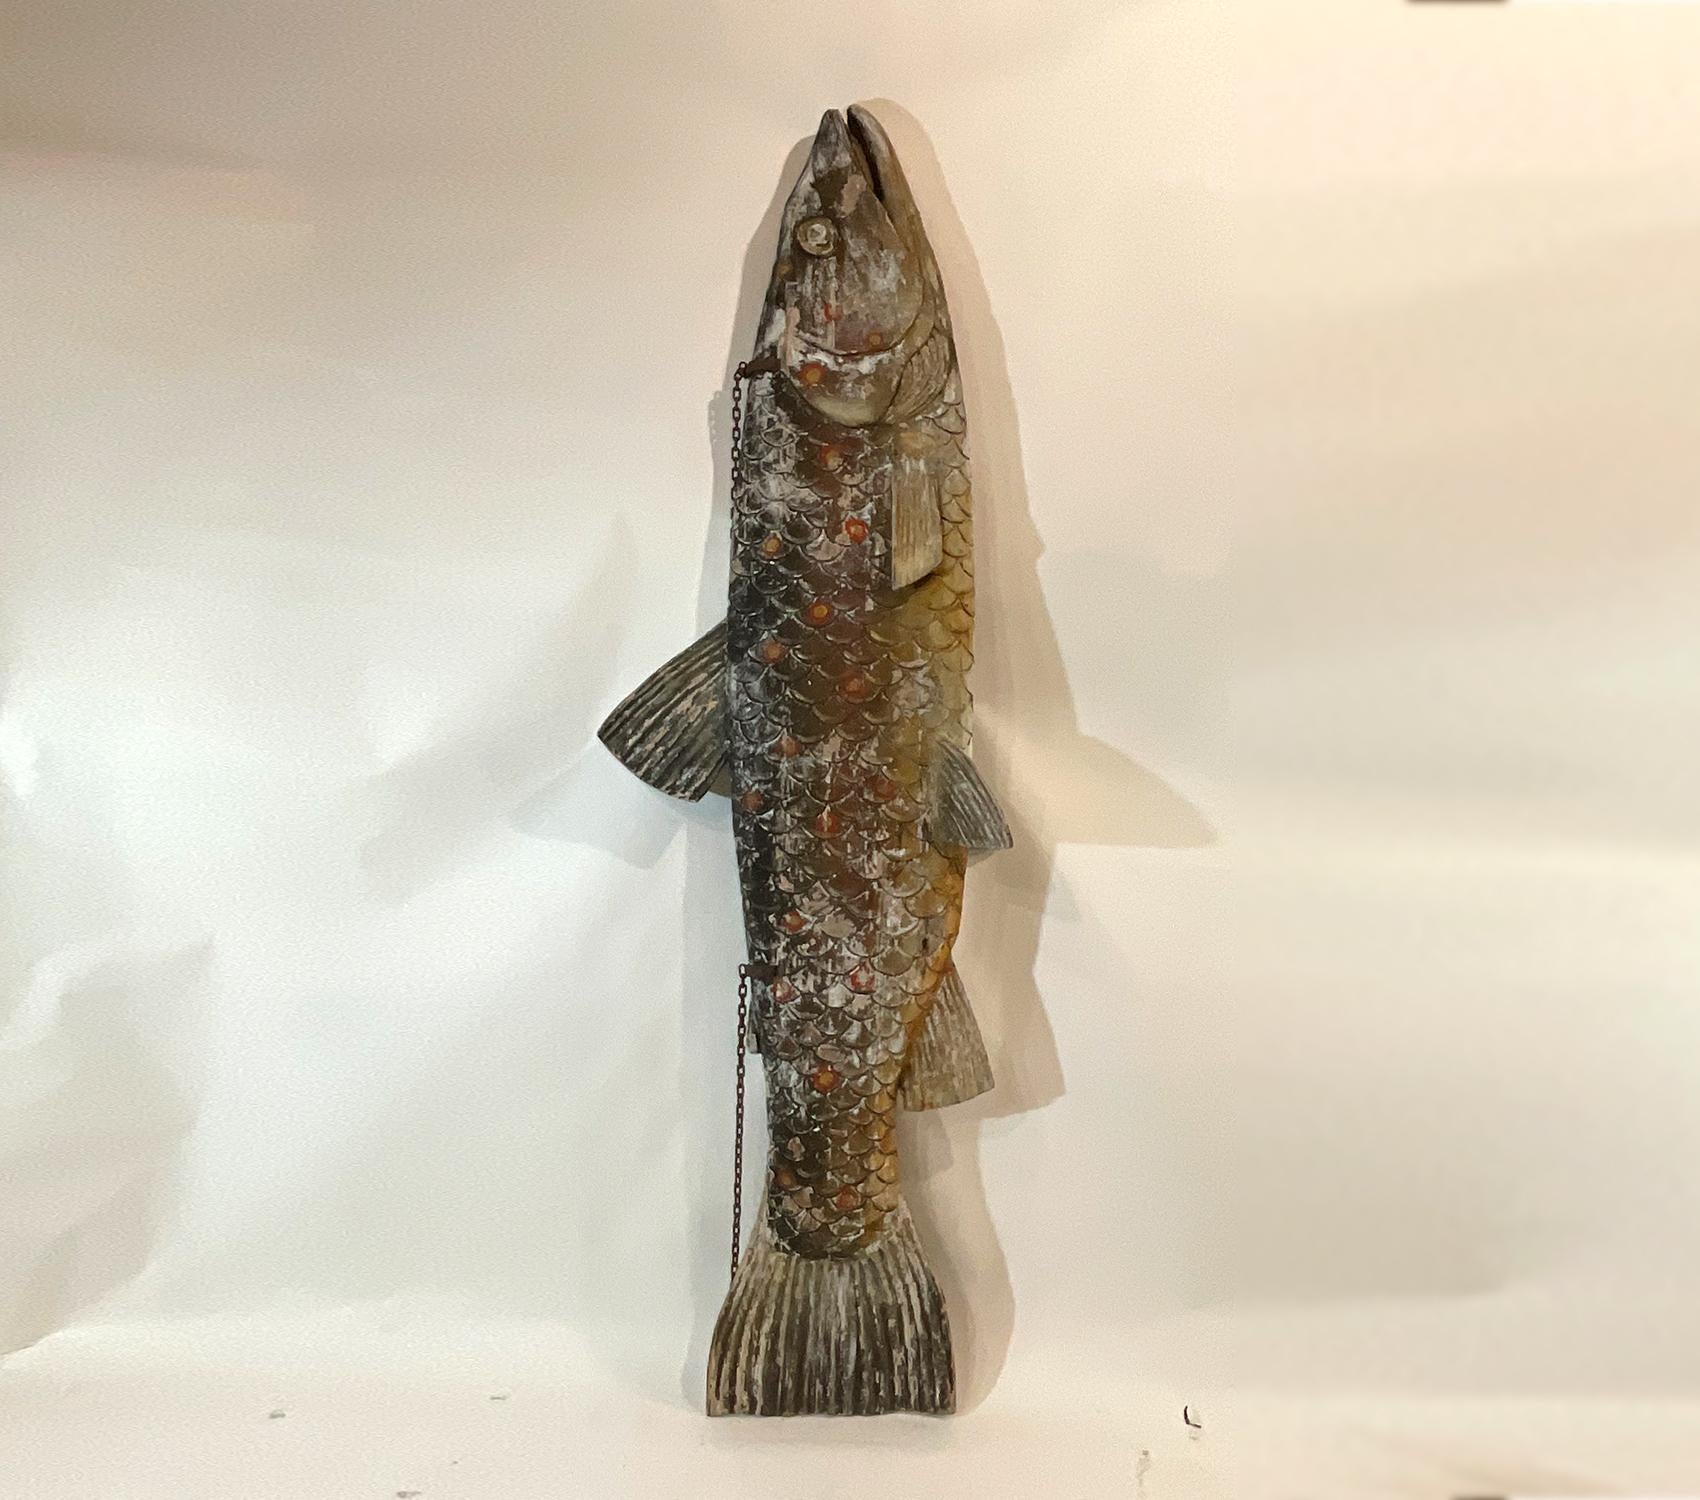 Incredible 115-inch long hanging fish of solid pine in the form of the trade signs that were hung over the fishmongers’ stalls in the Dover England fish market. Distressed painted finish, showing its age, mid twentieth century. Carved in